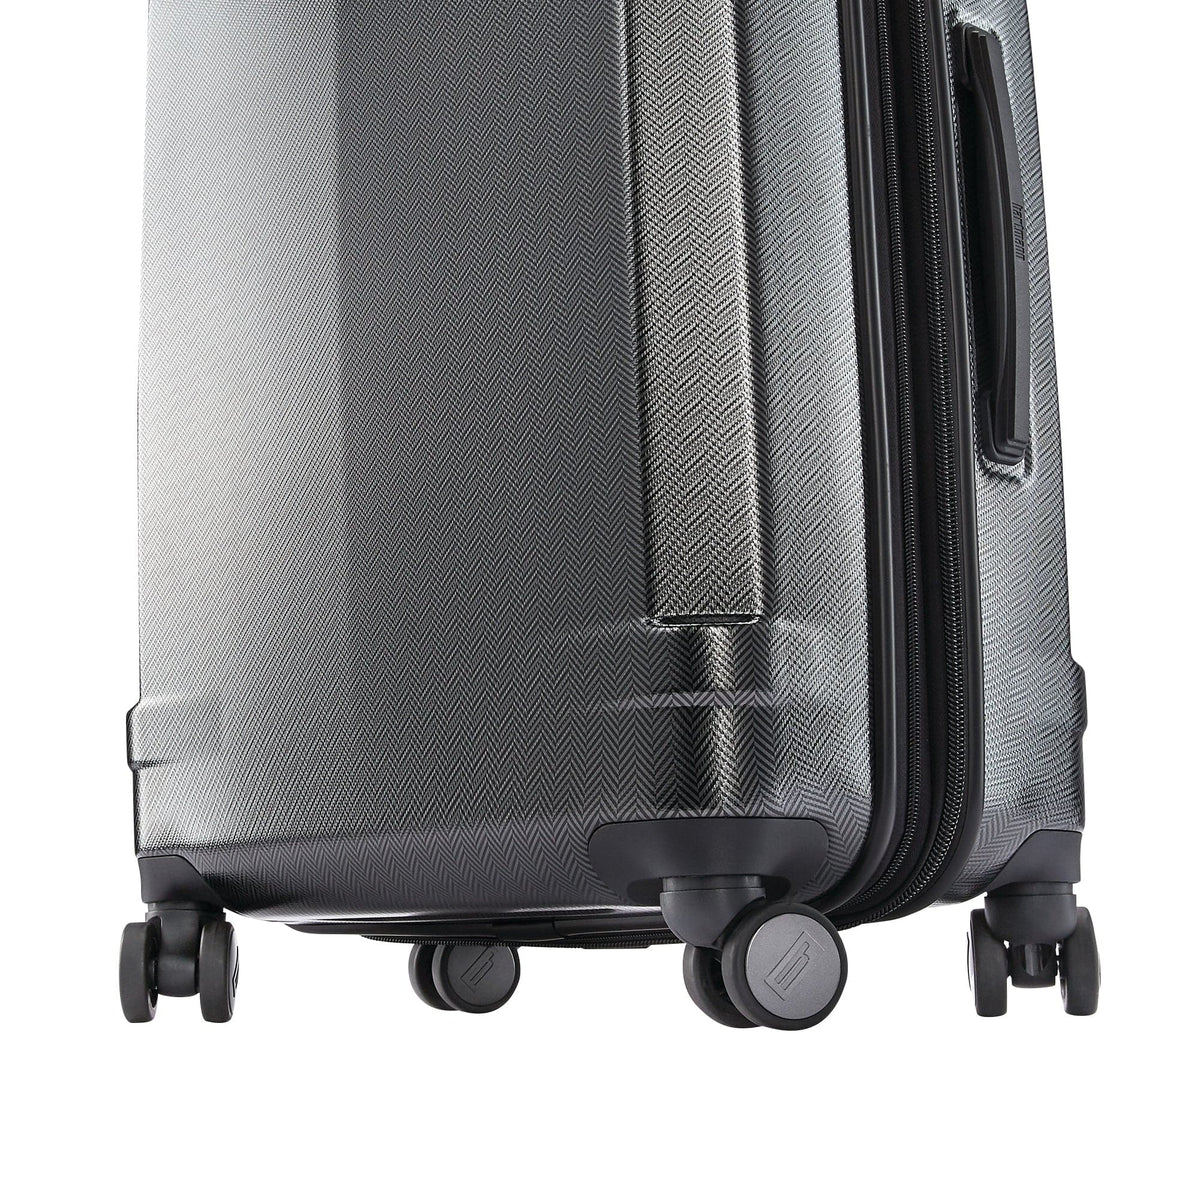 Hartmann Century Deluxe Hardside Extended Journey Expandable Spinner Luggage